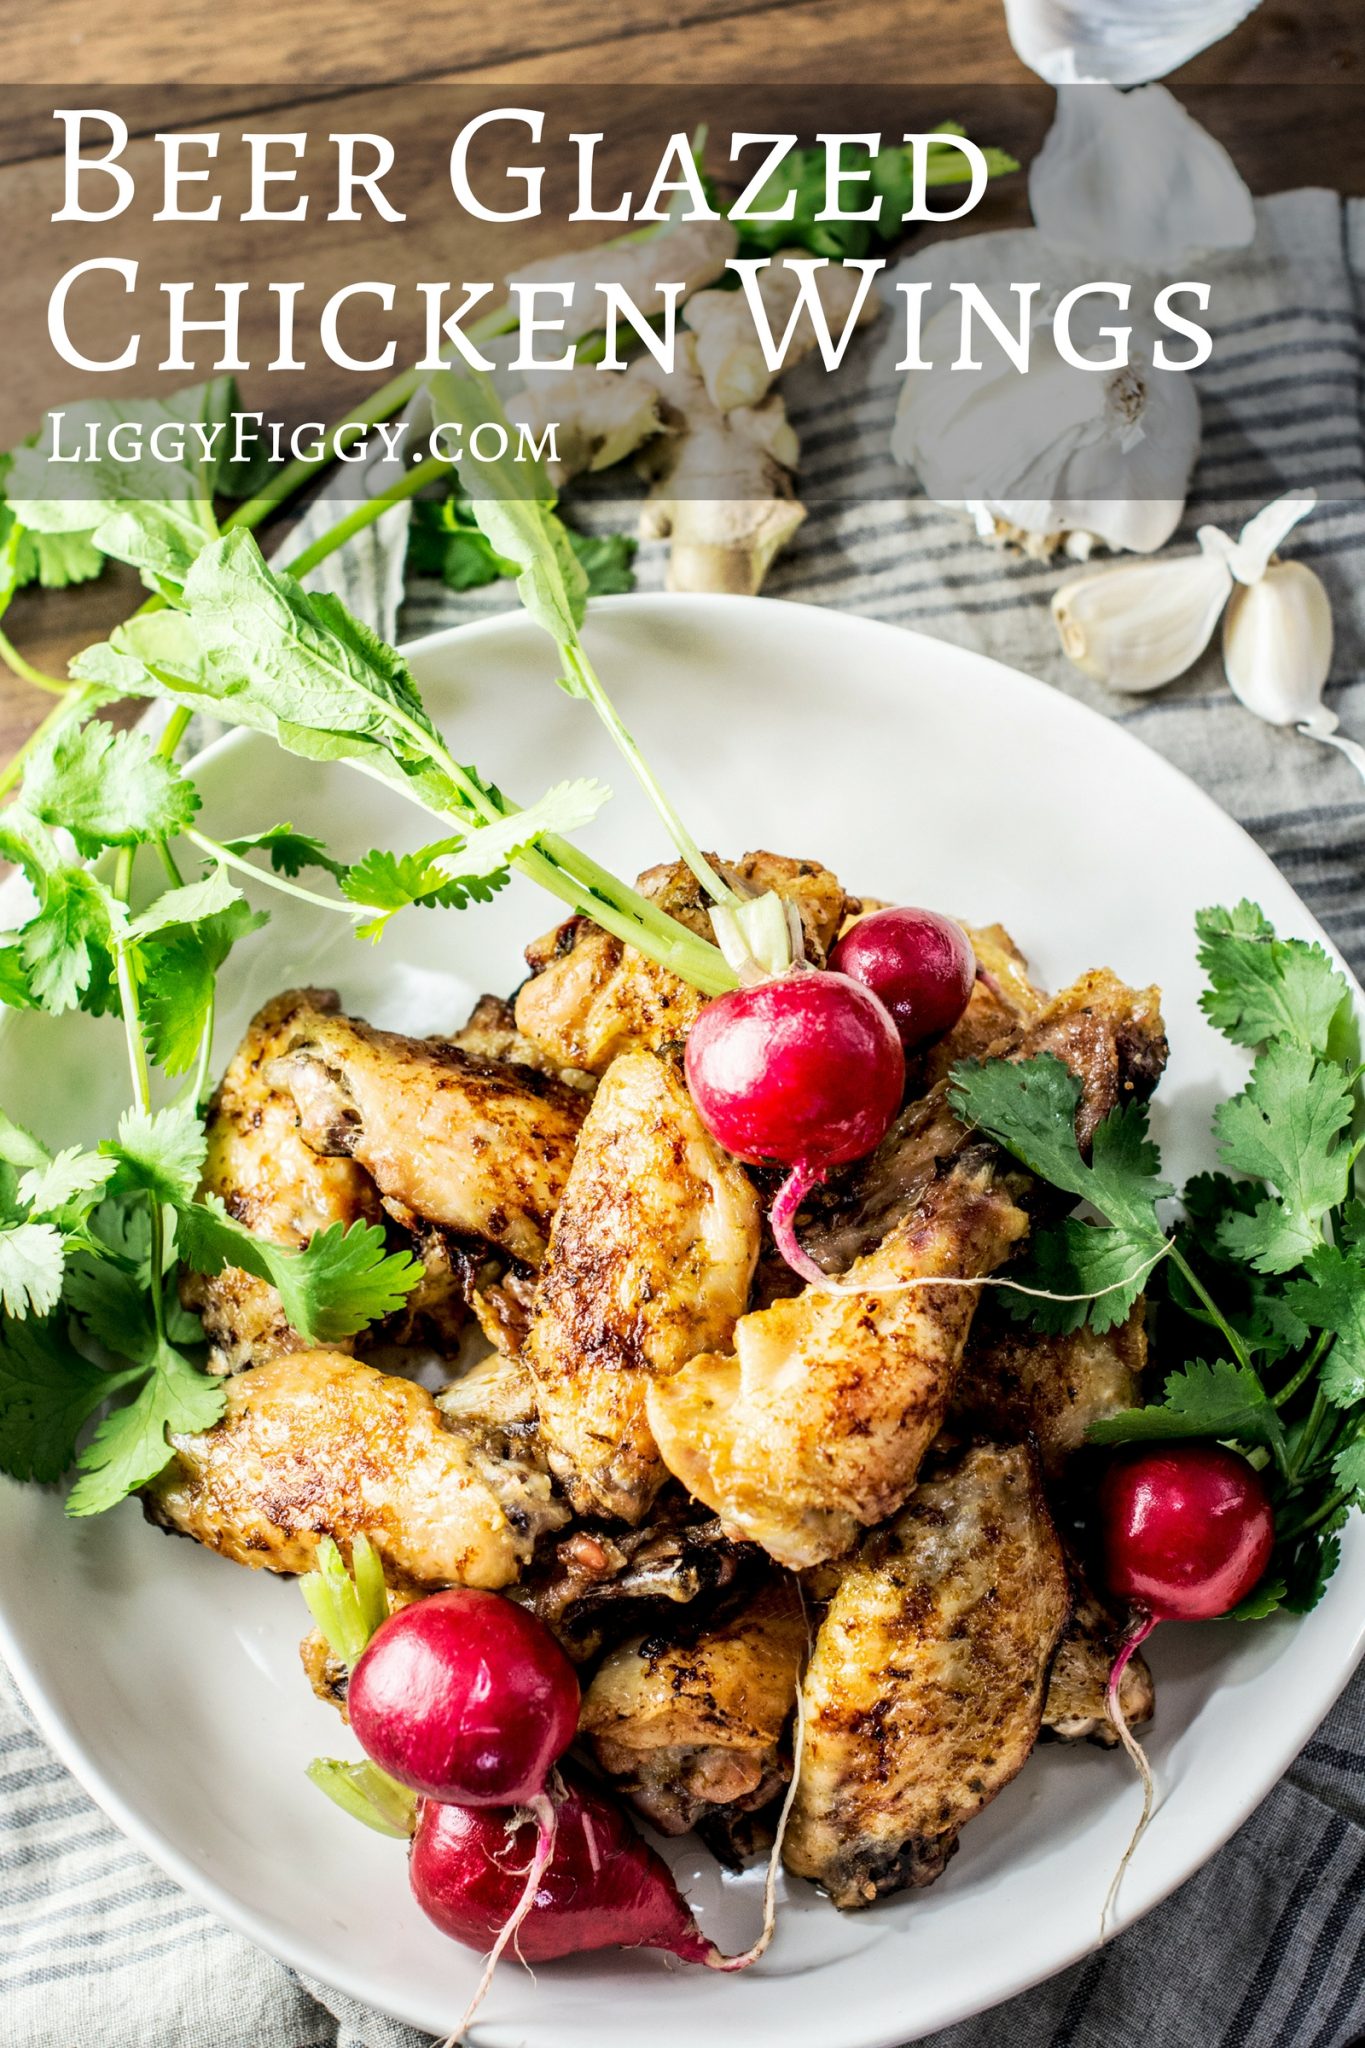 Enjoy these Beer Glazed Chicken Wings and find out what one of my favorite kitchen hacks is. Get the recipe at Little Figgy Food! #ad #JustPopandCook @pop.and.cook